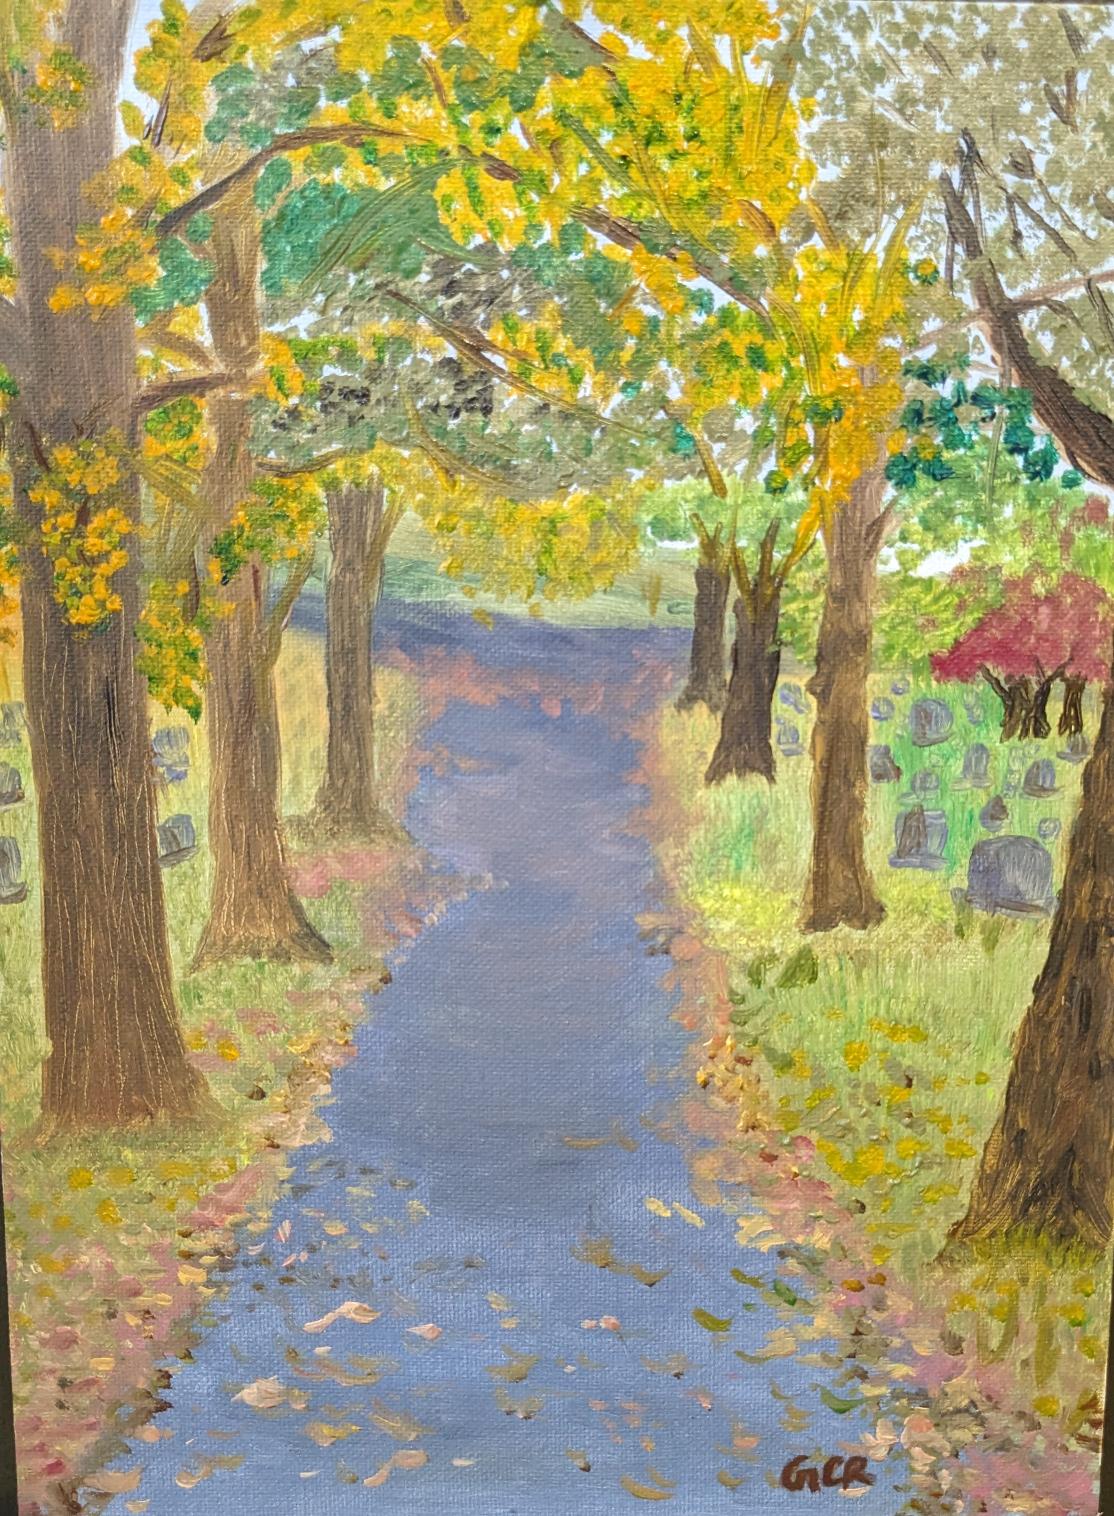 A plein air painting of trees on both sides of a path by Greeshma Raghuvaran